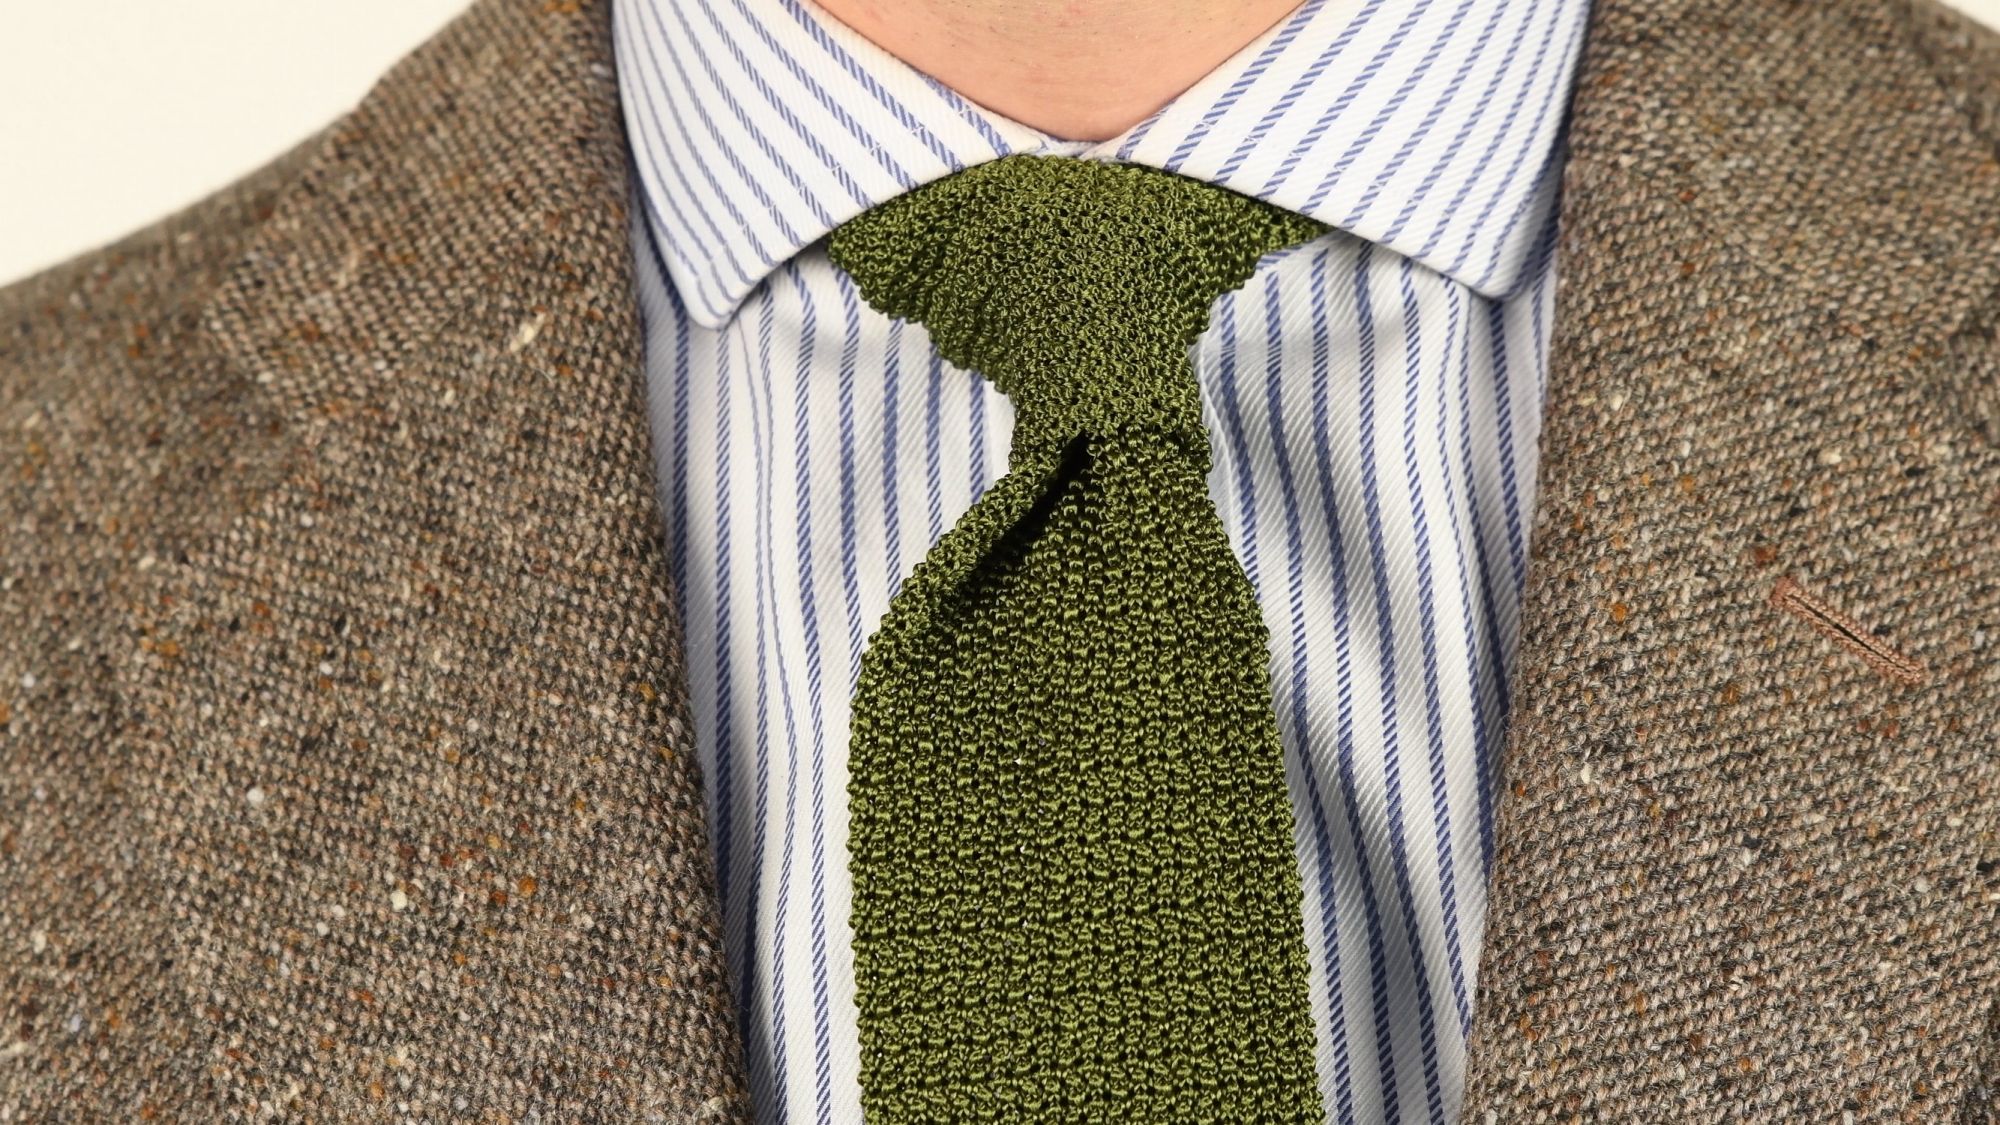 Beverly Foulard Silk Tie, Olive Green / Brown Regular Length - 58 Inches (recommended for Men Up to 6'1)